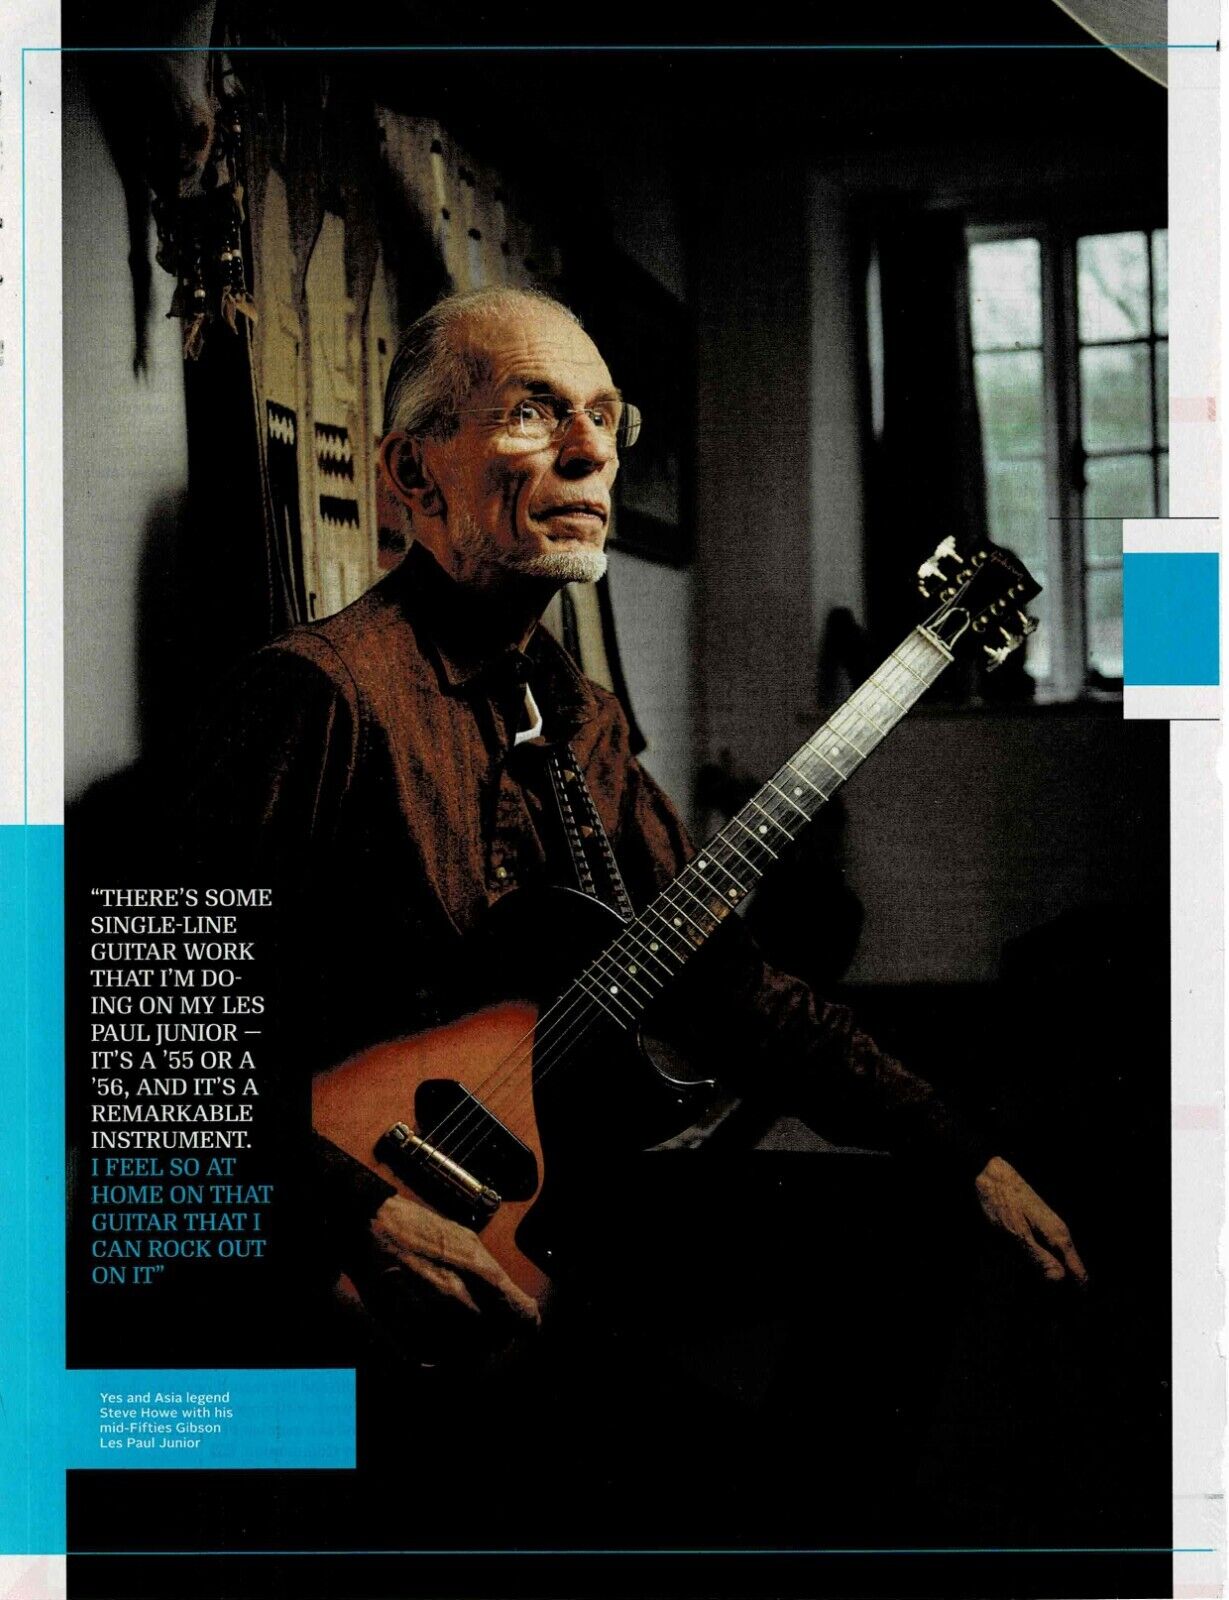 Steve Howe of Yes / Asia - Music Print Ad Photo - 2020